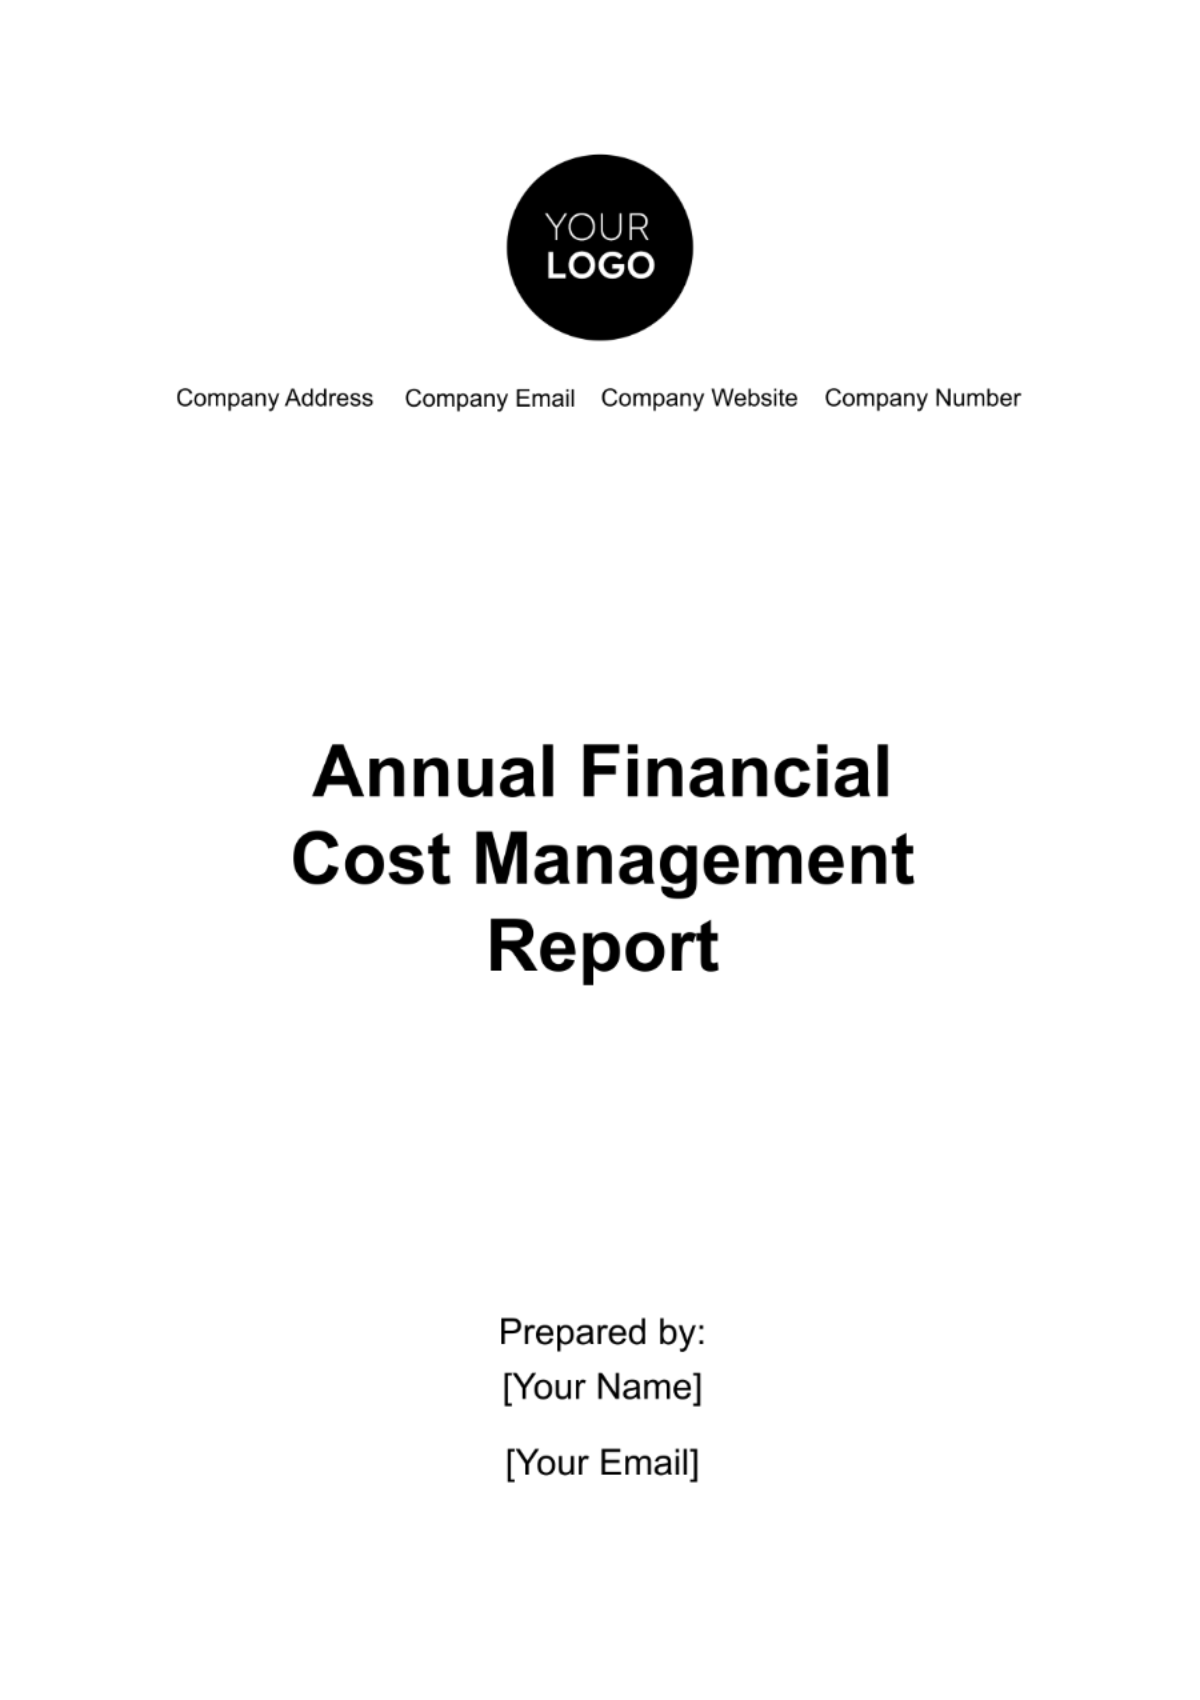 Annual Financial Cost Management Report Template